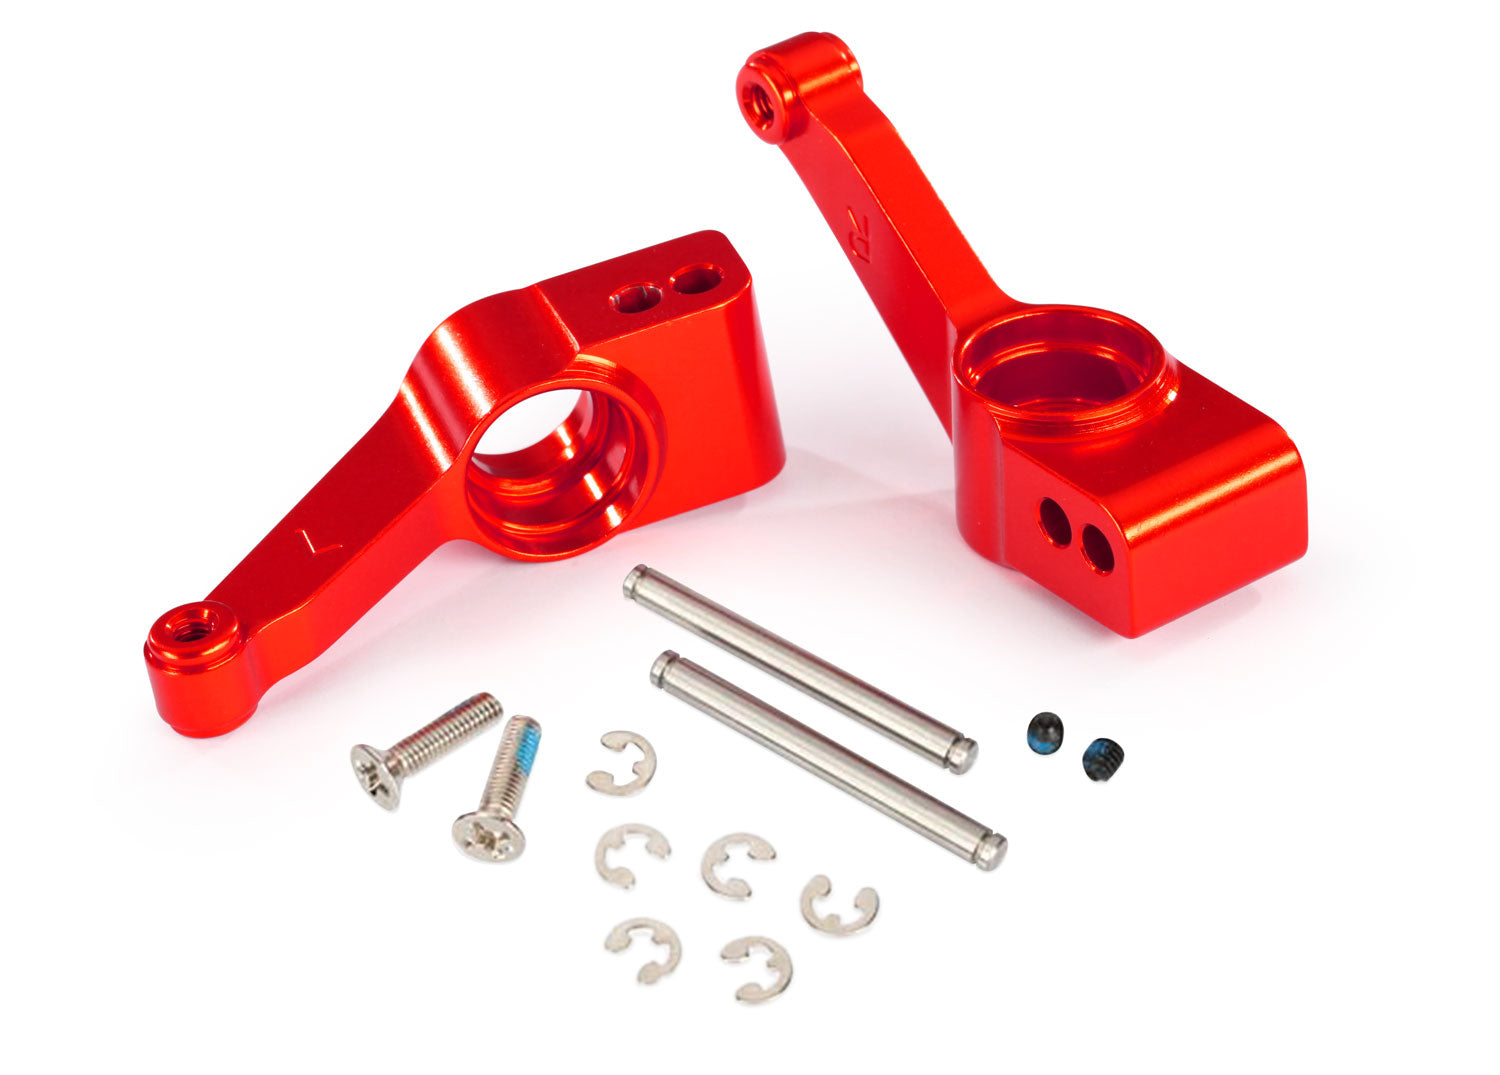 Traxxas 1952 Rear Stub Axle Carriers (Assorted Colors)